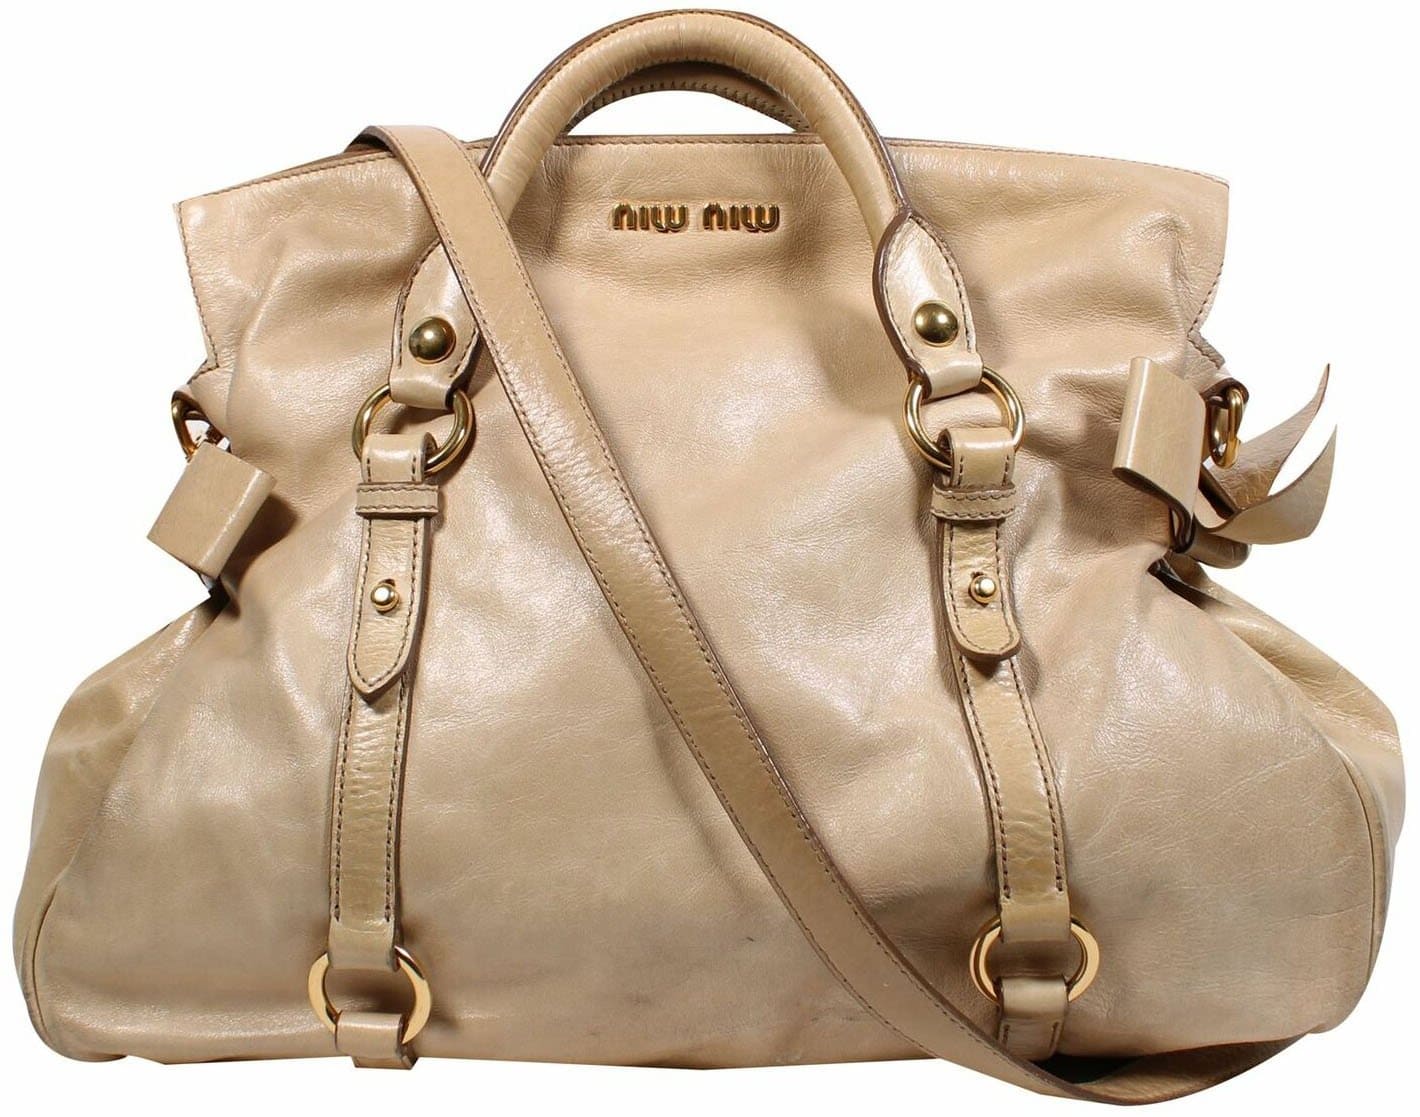 Miu Miu's classic Vitello Bow bag features rolled double top handles with a fold-over top and bow accents on the sides